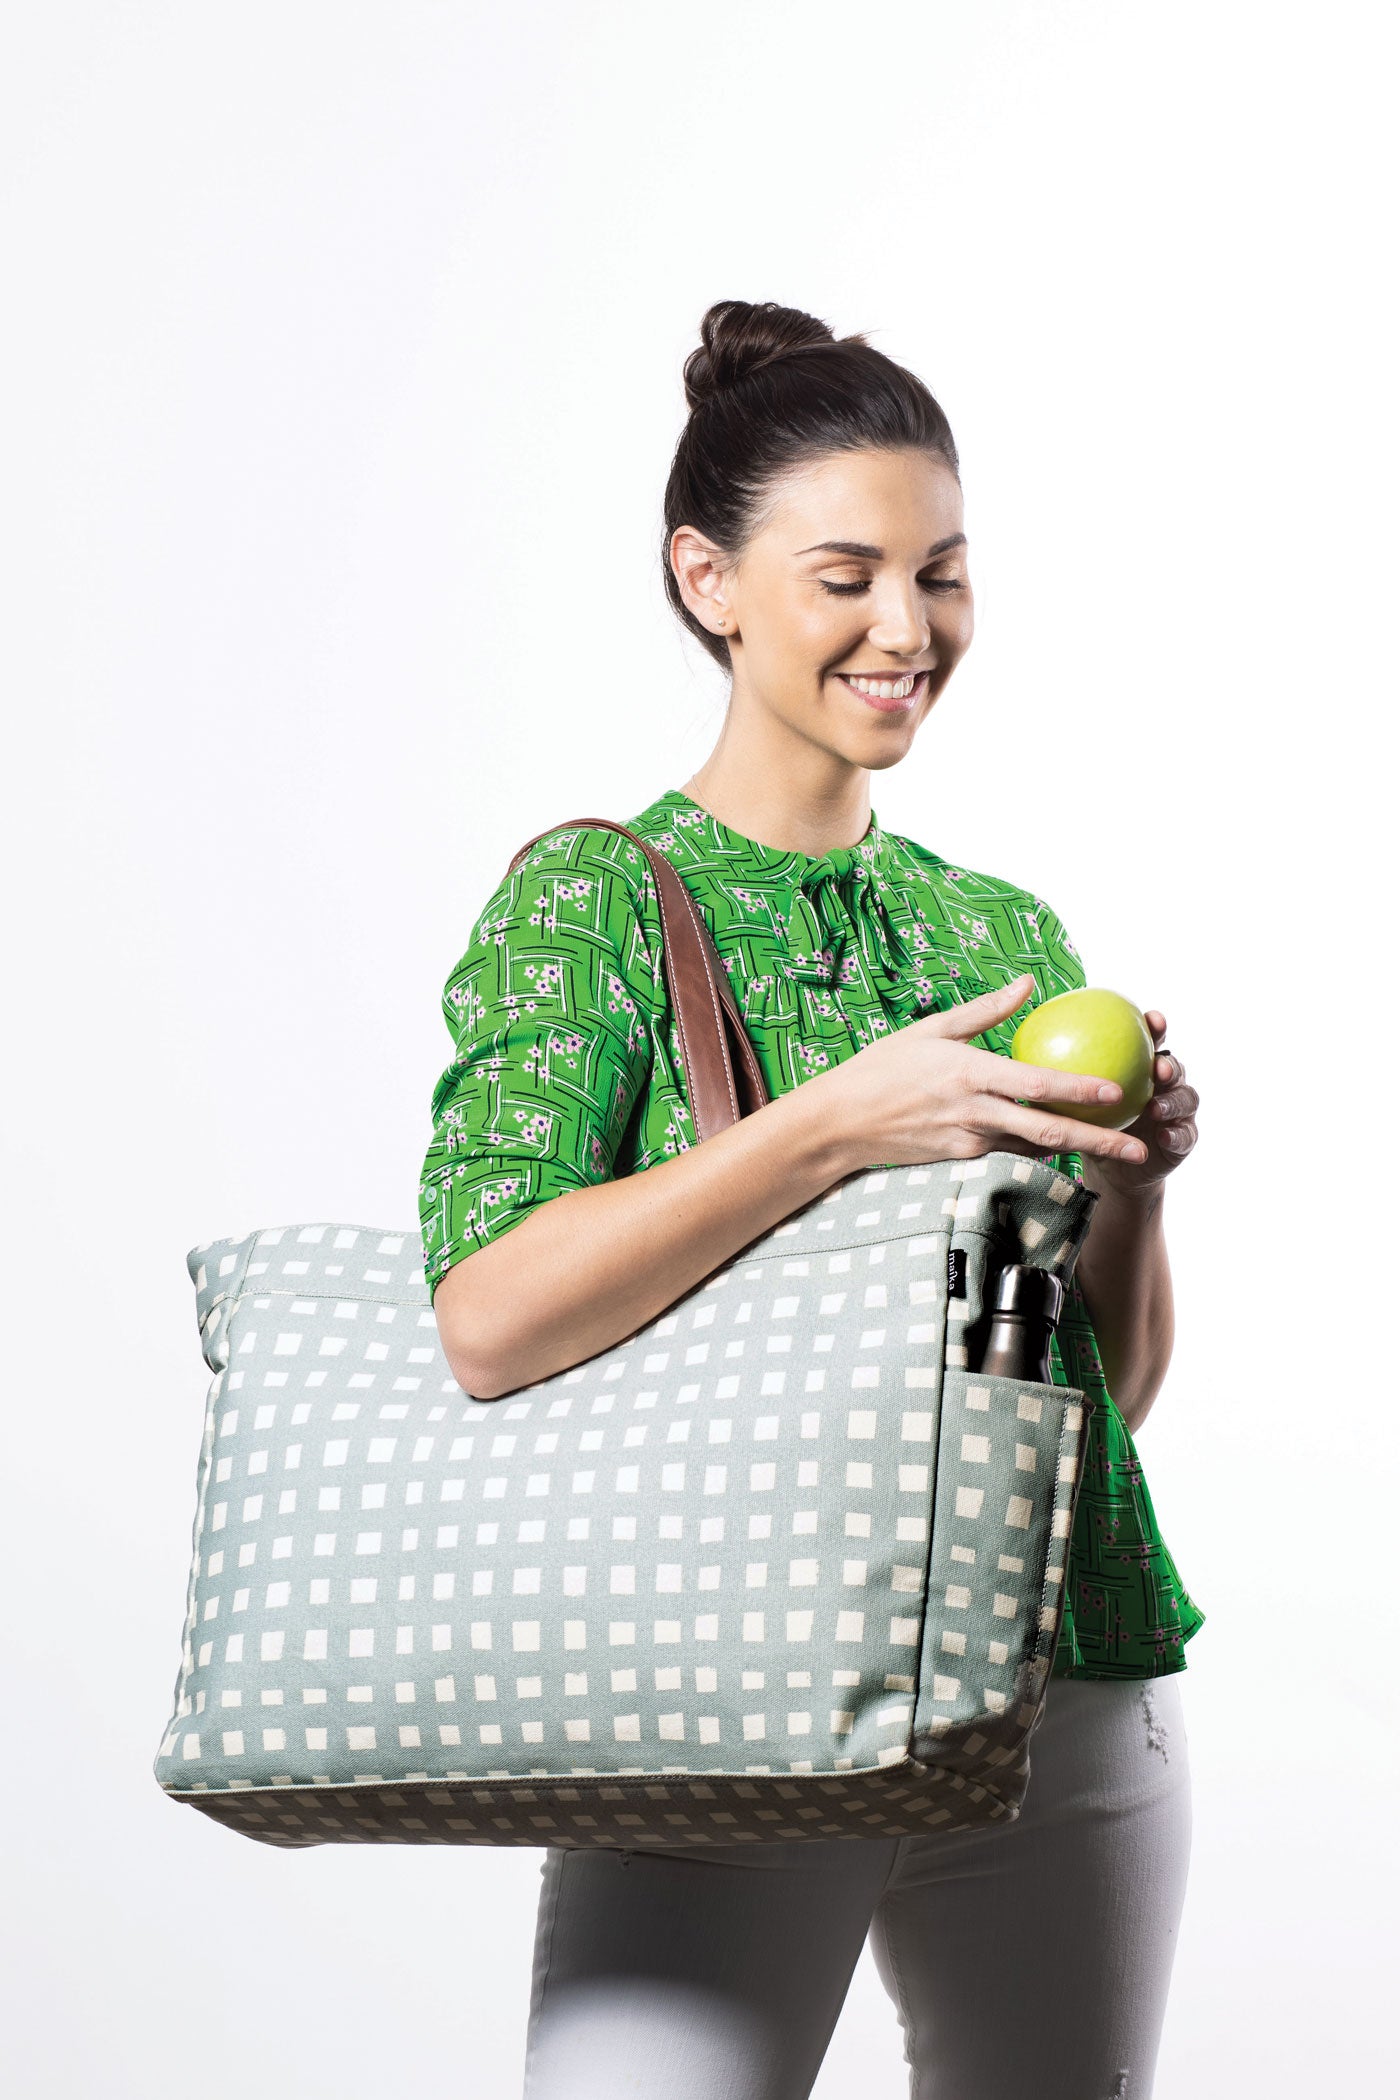 Our Best Seller, Now Even Better: Meet the Carryall Tote Plus